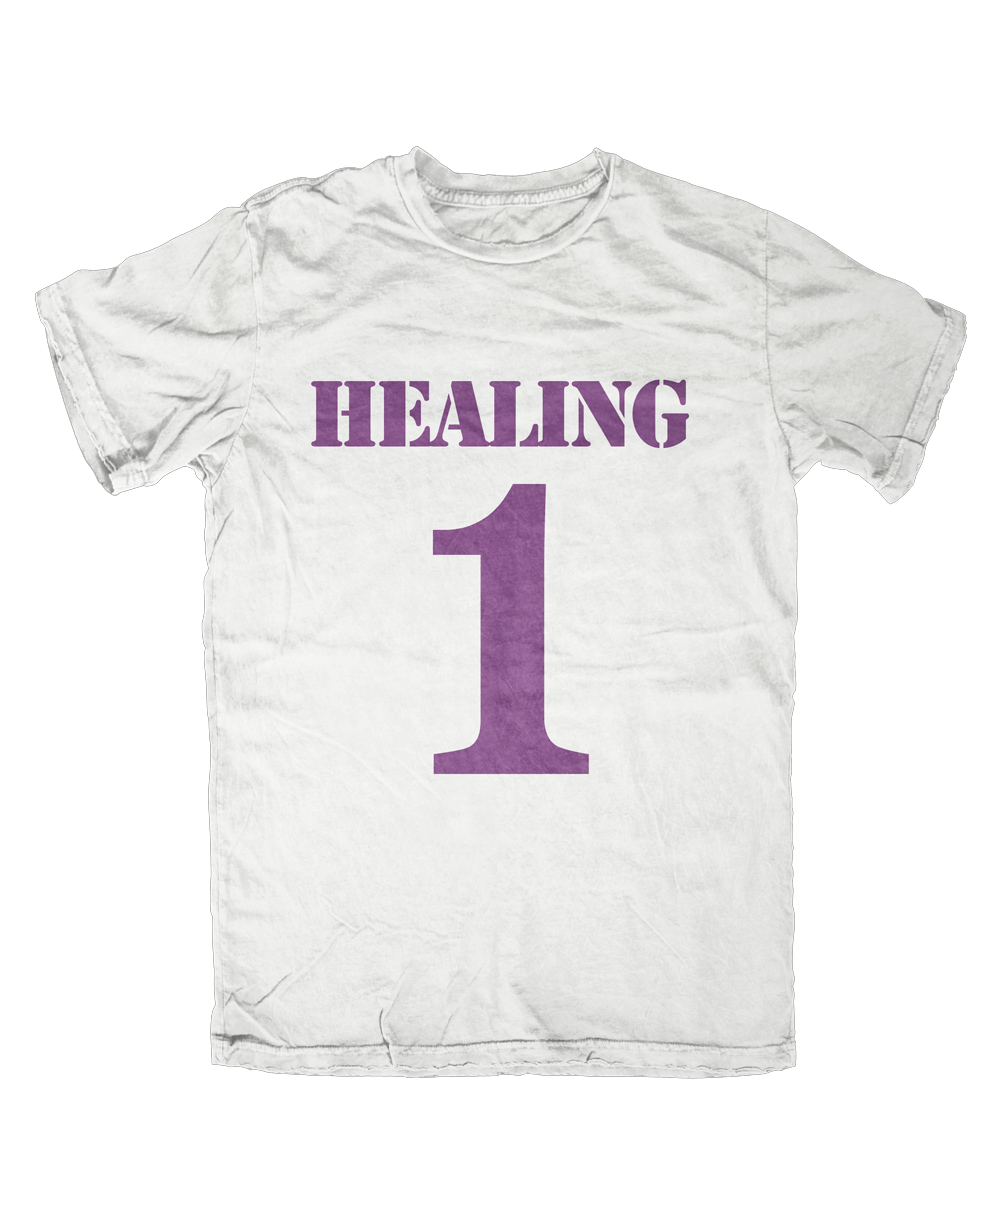 I Am HealingOne, LLC | We offer on-line services only at this time, Birmingham, AL 35204, USA | Phone: (205) 419-7079